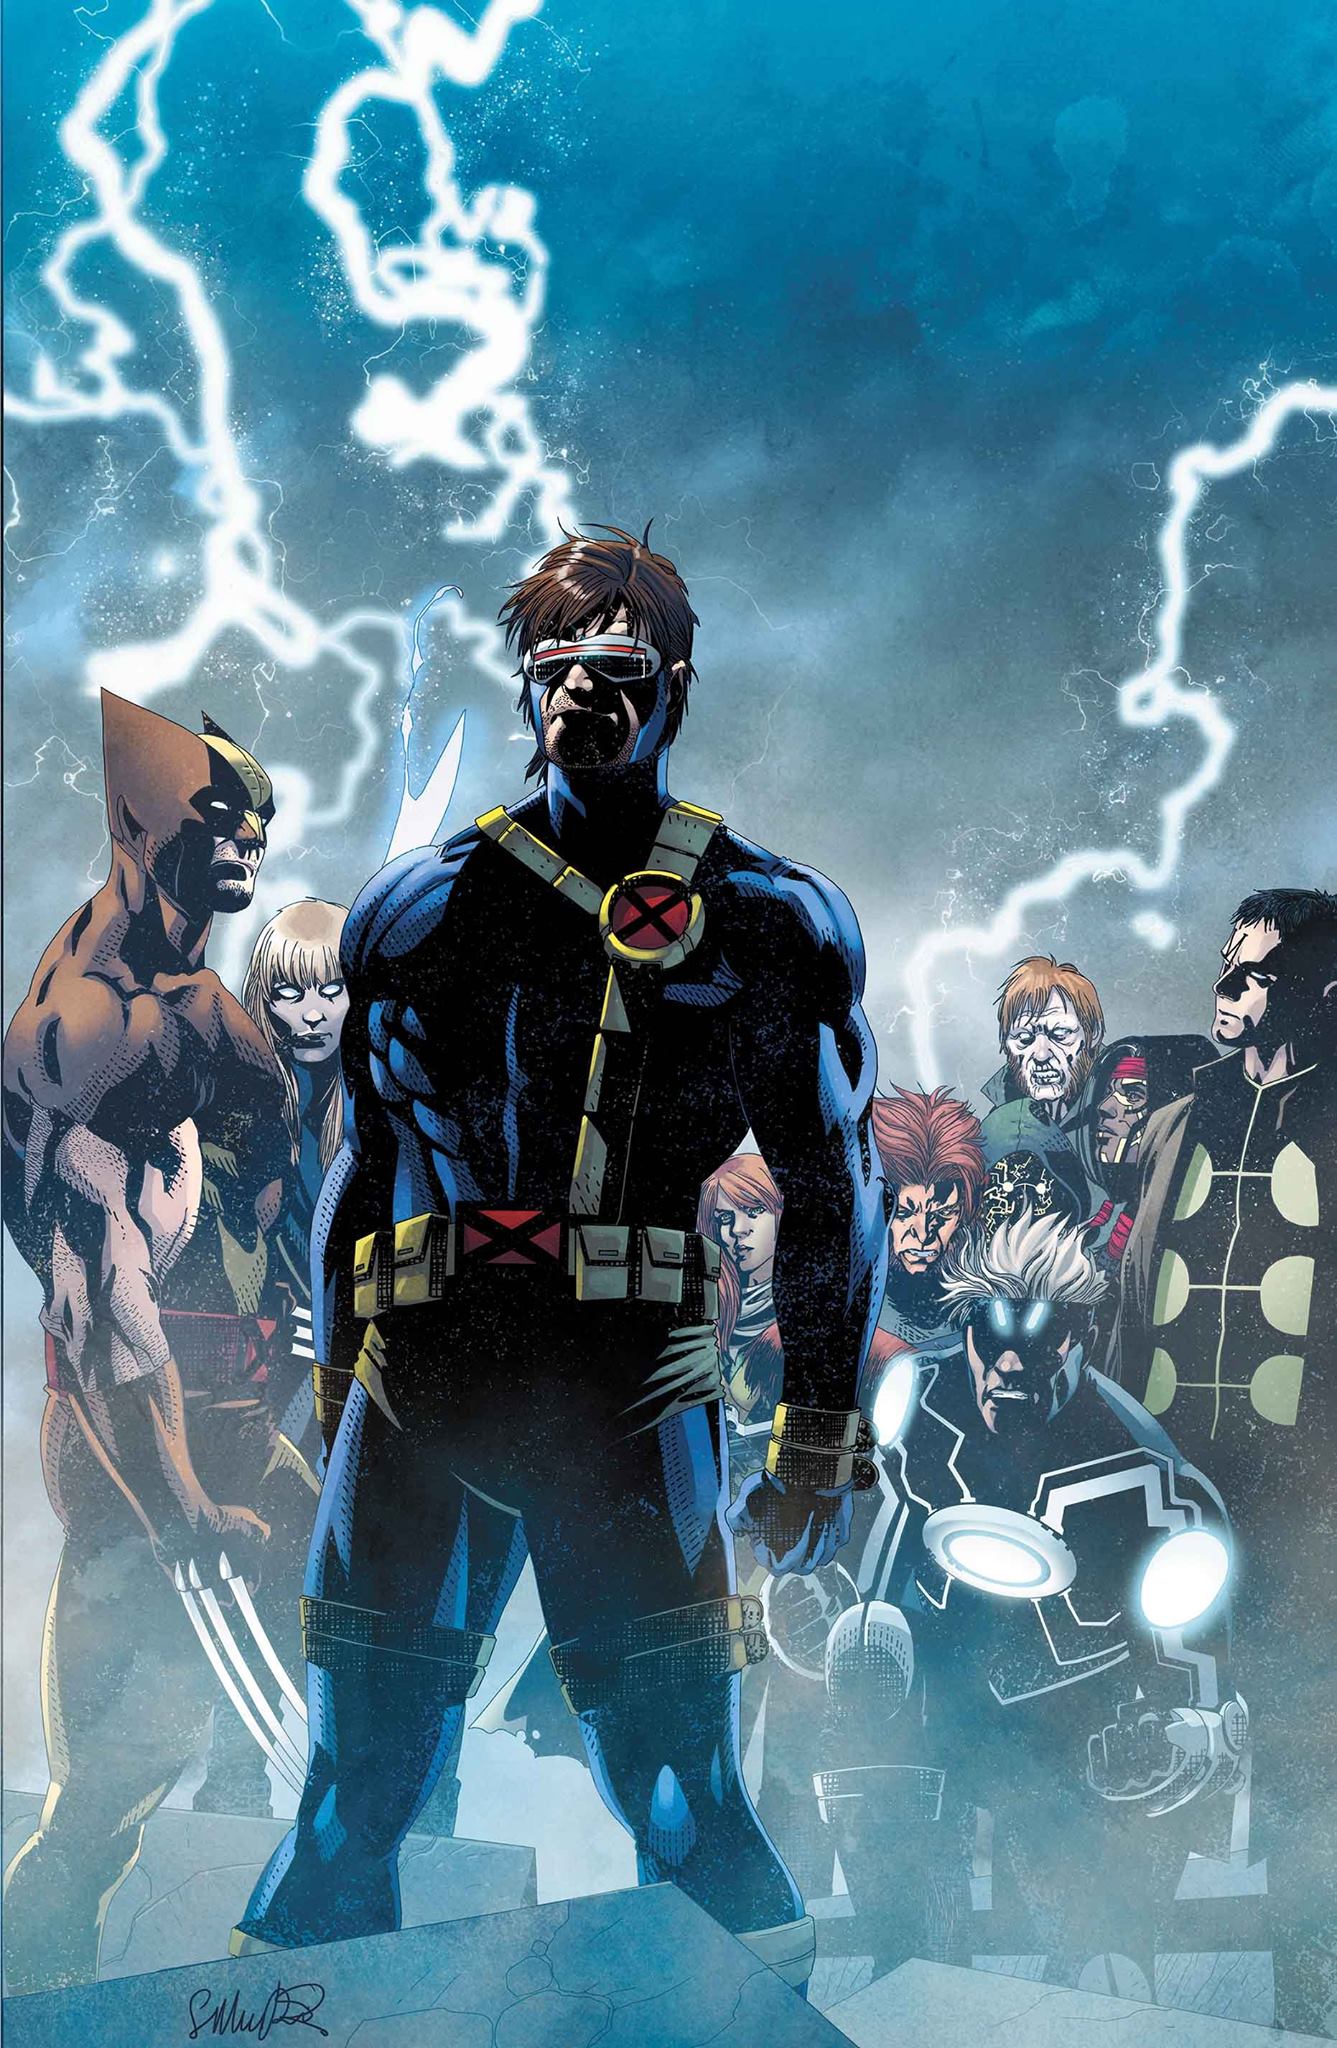 Cyclops & a New Roster Hit UNCANNY XMEN in March! Freaksugar